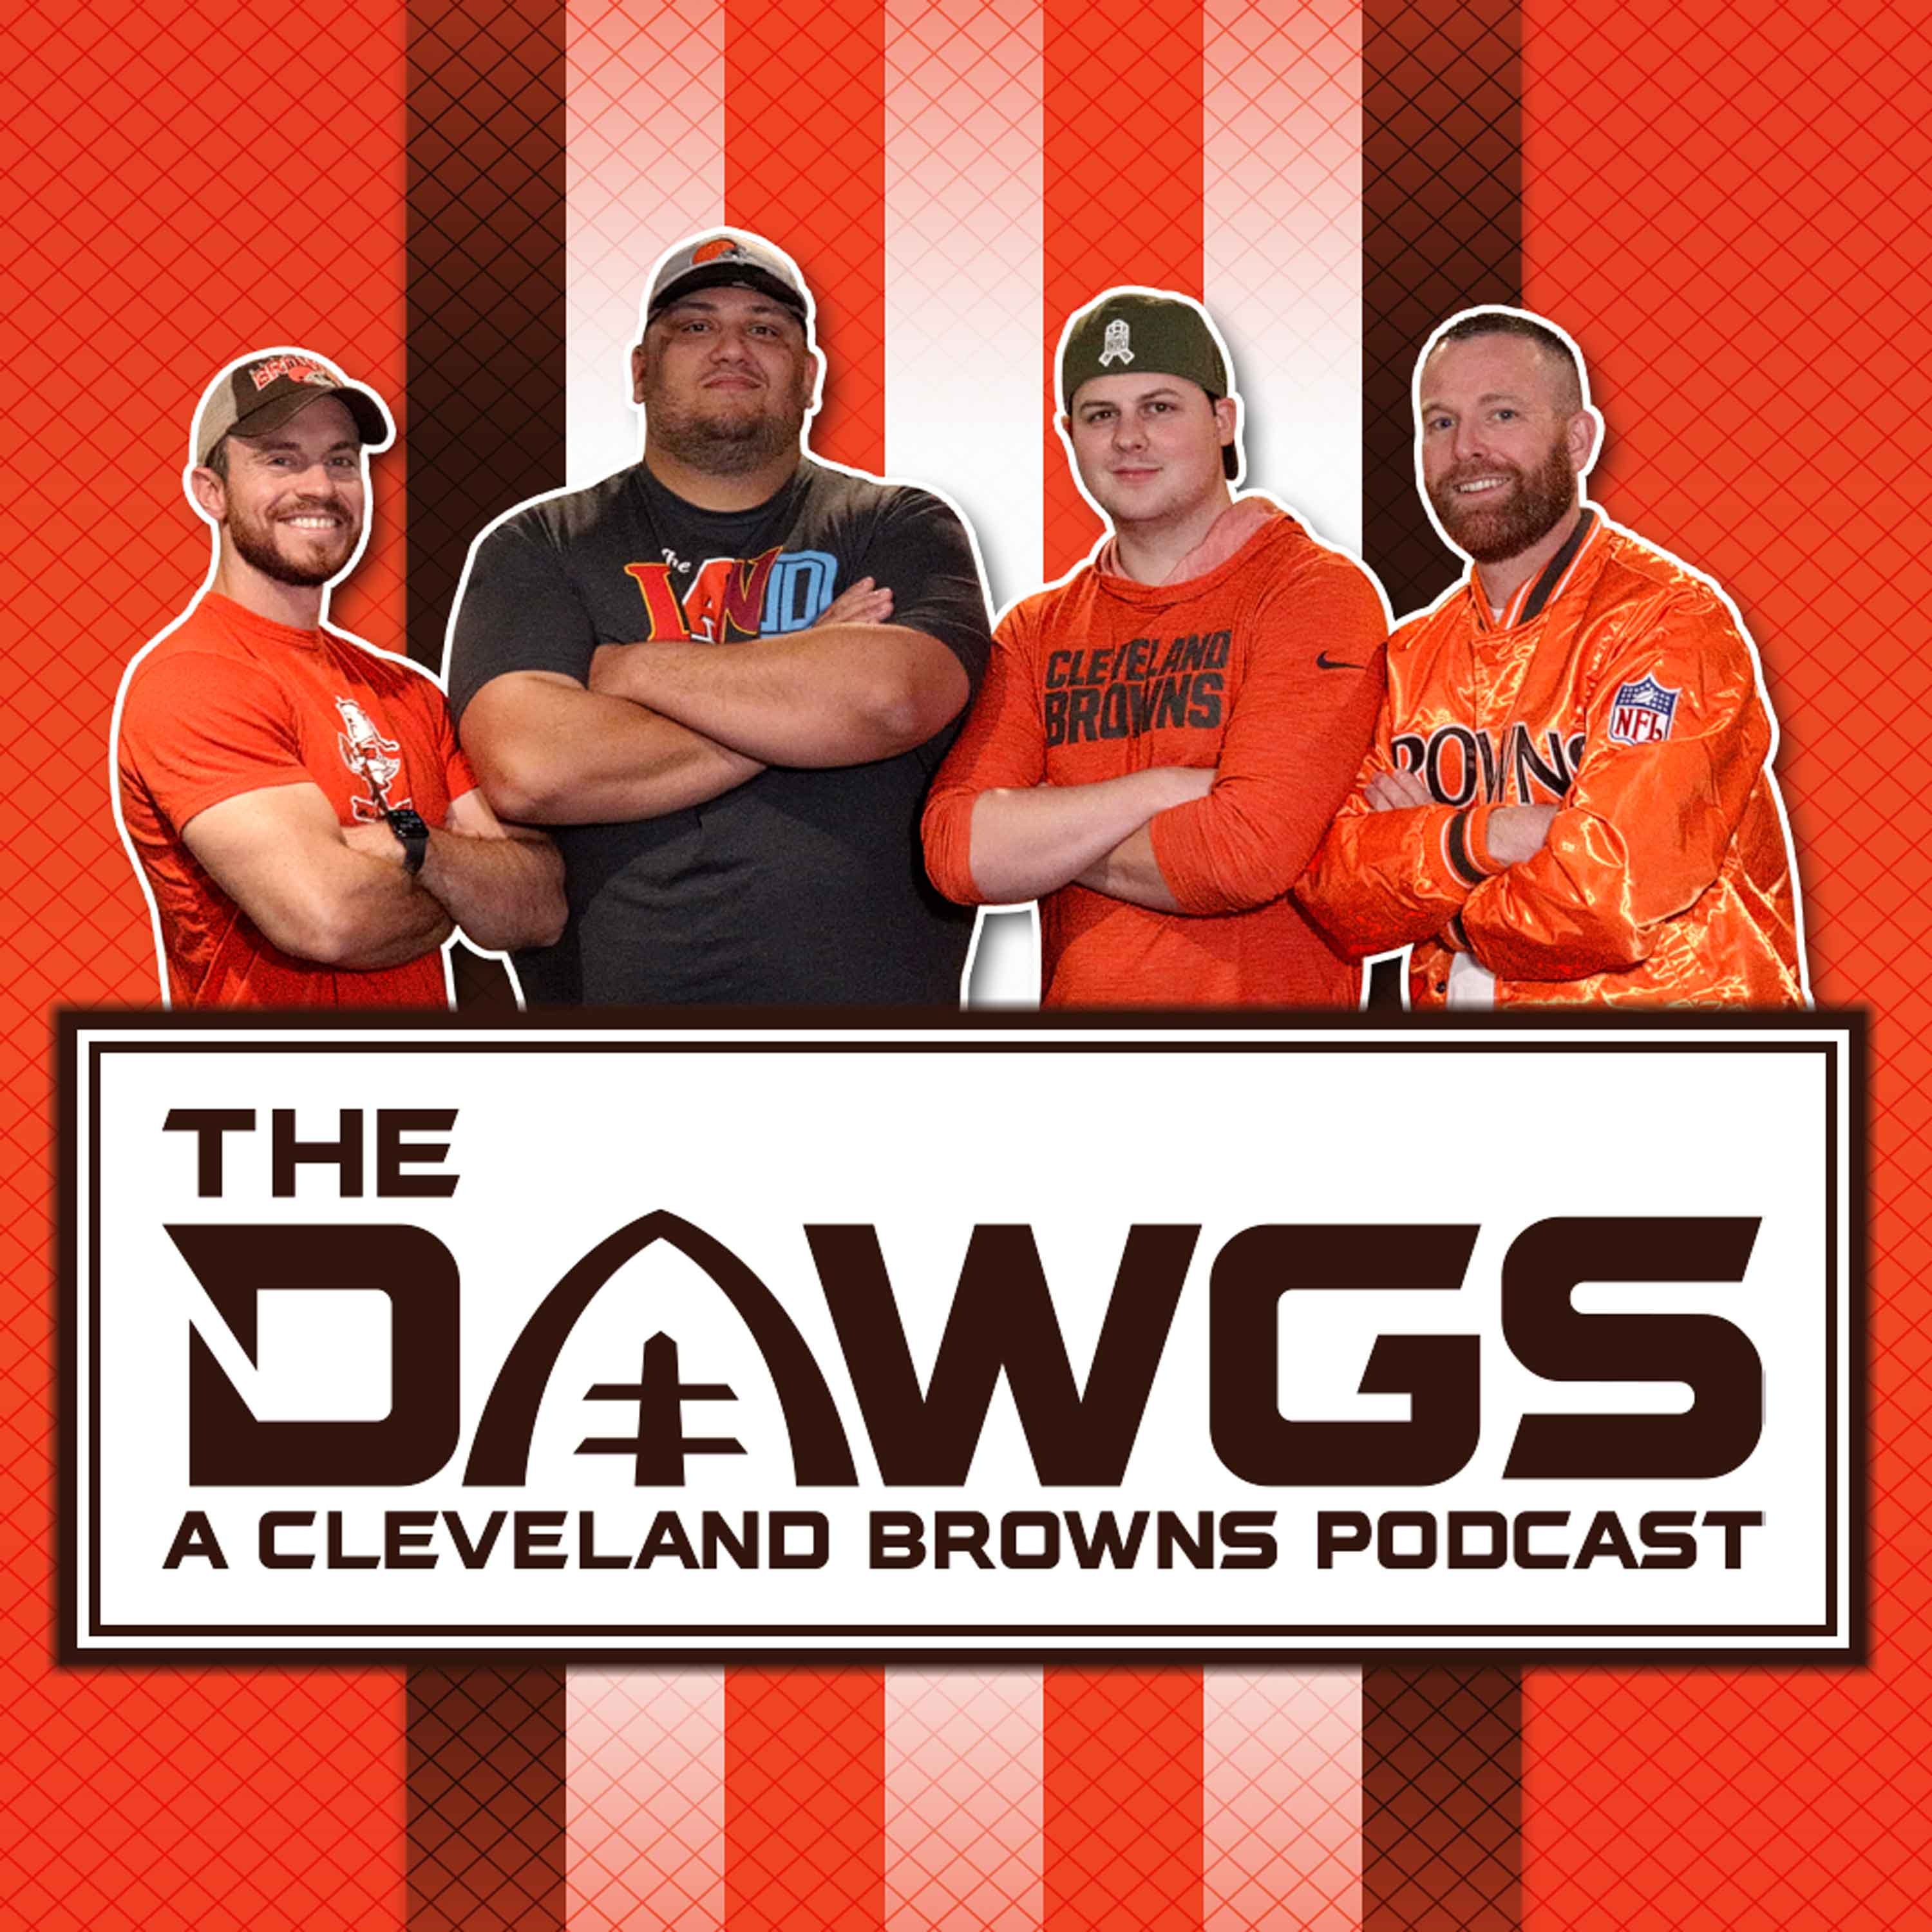 Week 10 Preview - Cleveland Browns at Miami Dolphins  | The Dawgs - A Cleveland Browns Podcast - November 10, 2022